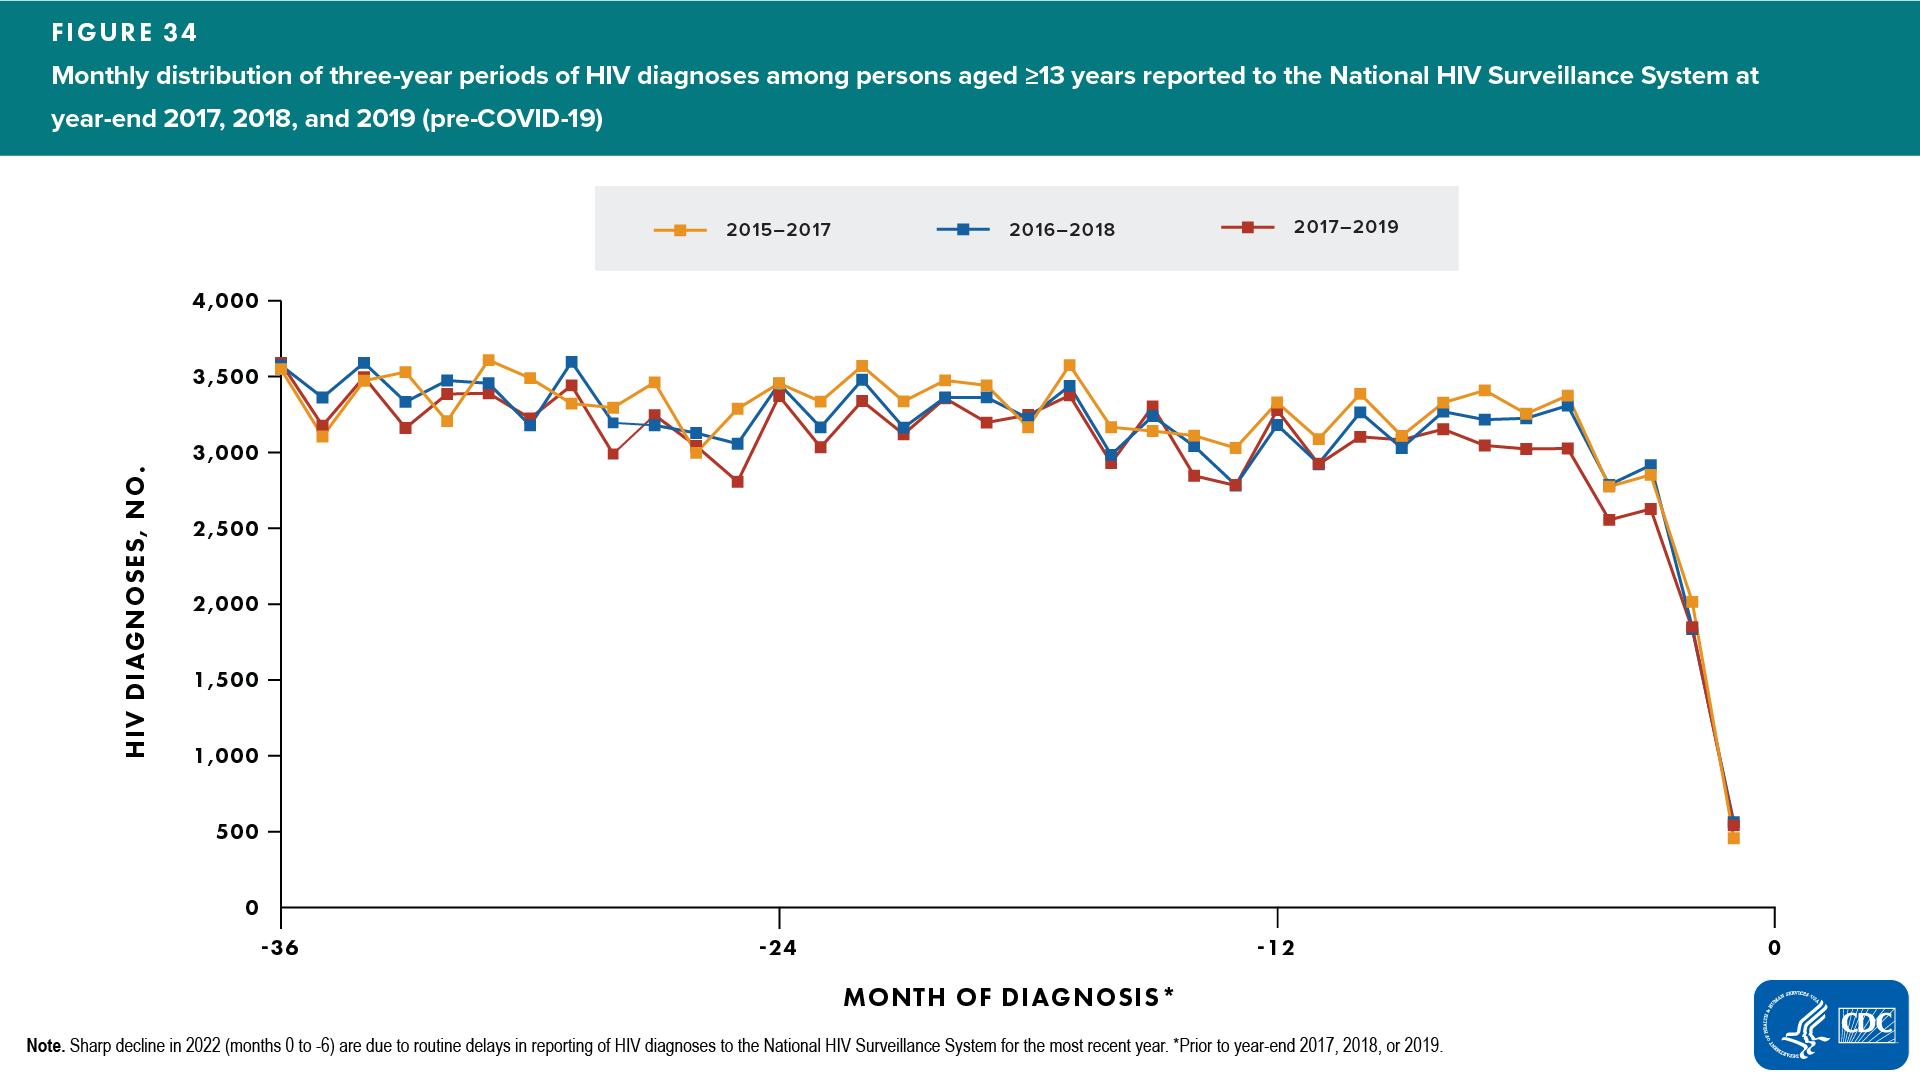 Figure 34. Monthly distribution of three-year periods of HIV diagnoses among persons aged ≥13 years reported to the National HIV Surveillance System at year-end 2017, 2018, and 2019 (pre-COVID-19)